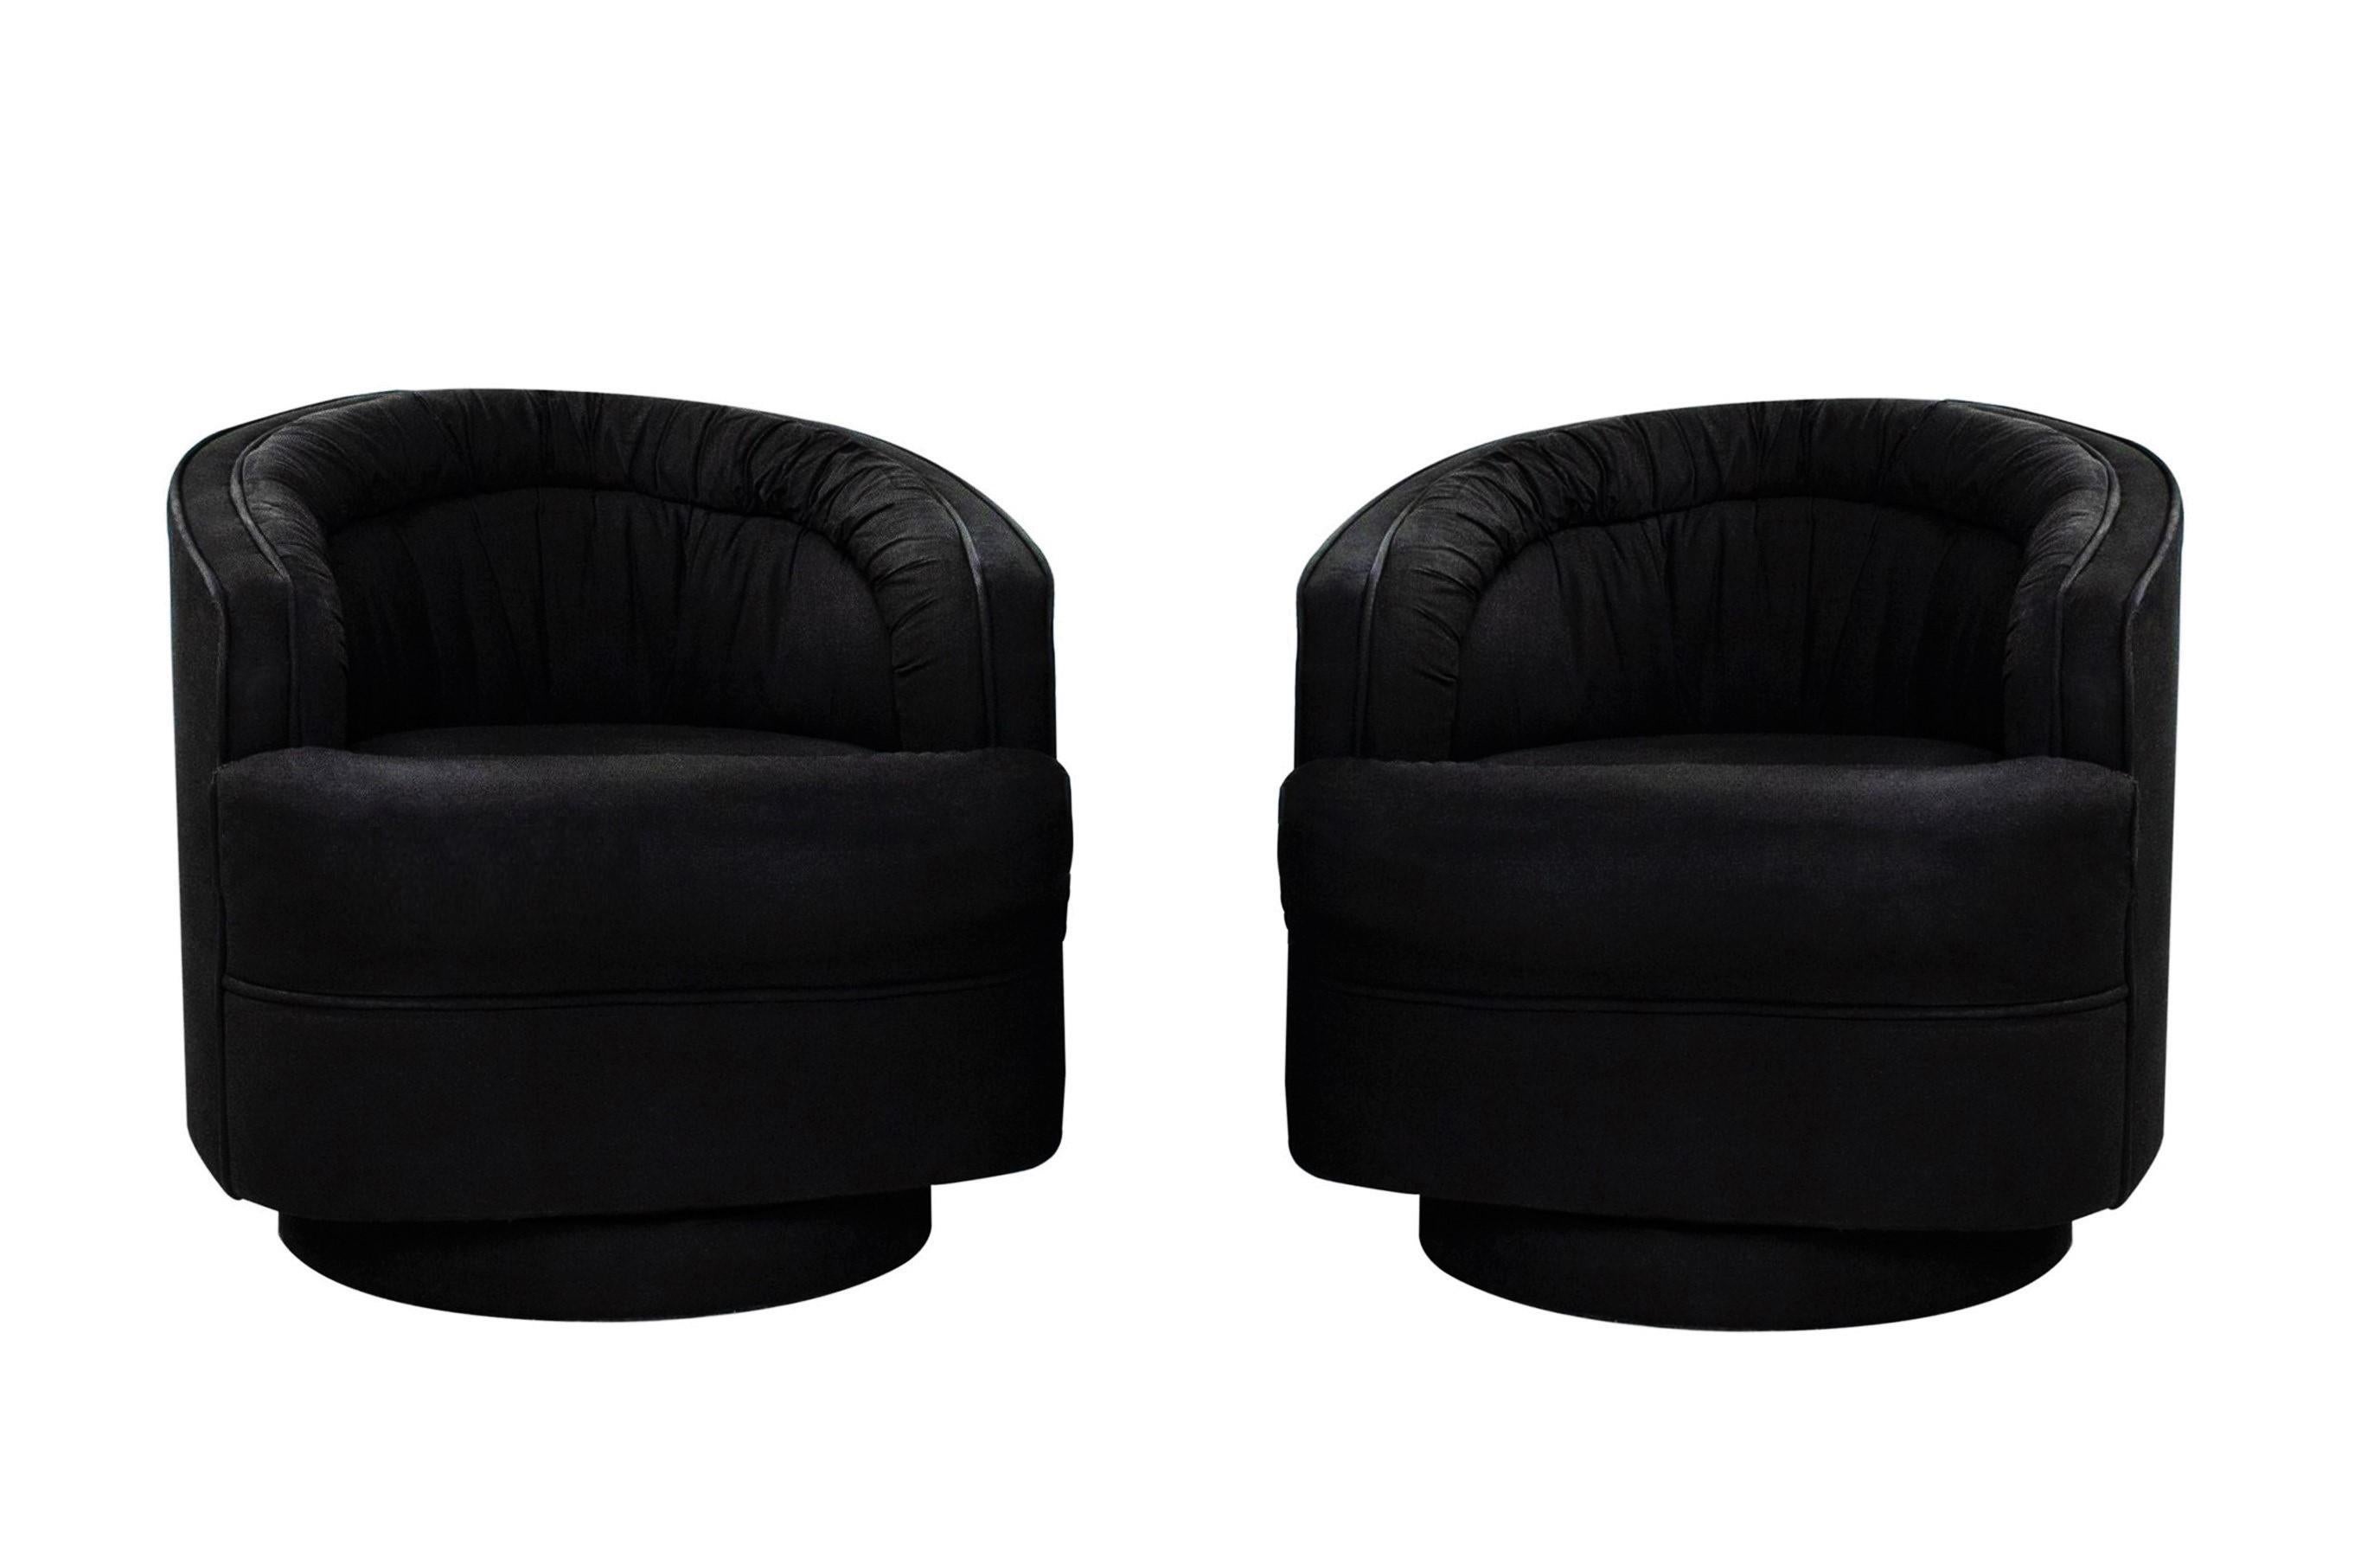 Stunning pair of ultra luxe and comfortable swivel chairs in the style of Milo Baughman. Chairs are freshly upholstered in a soft black fabric, featuring a ruched tufting or pleated back resting on upholstered bases, adds visual interest to the